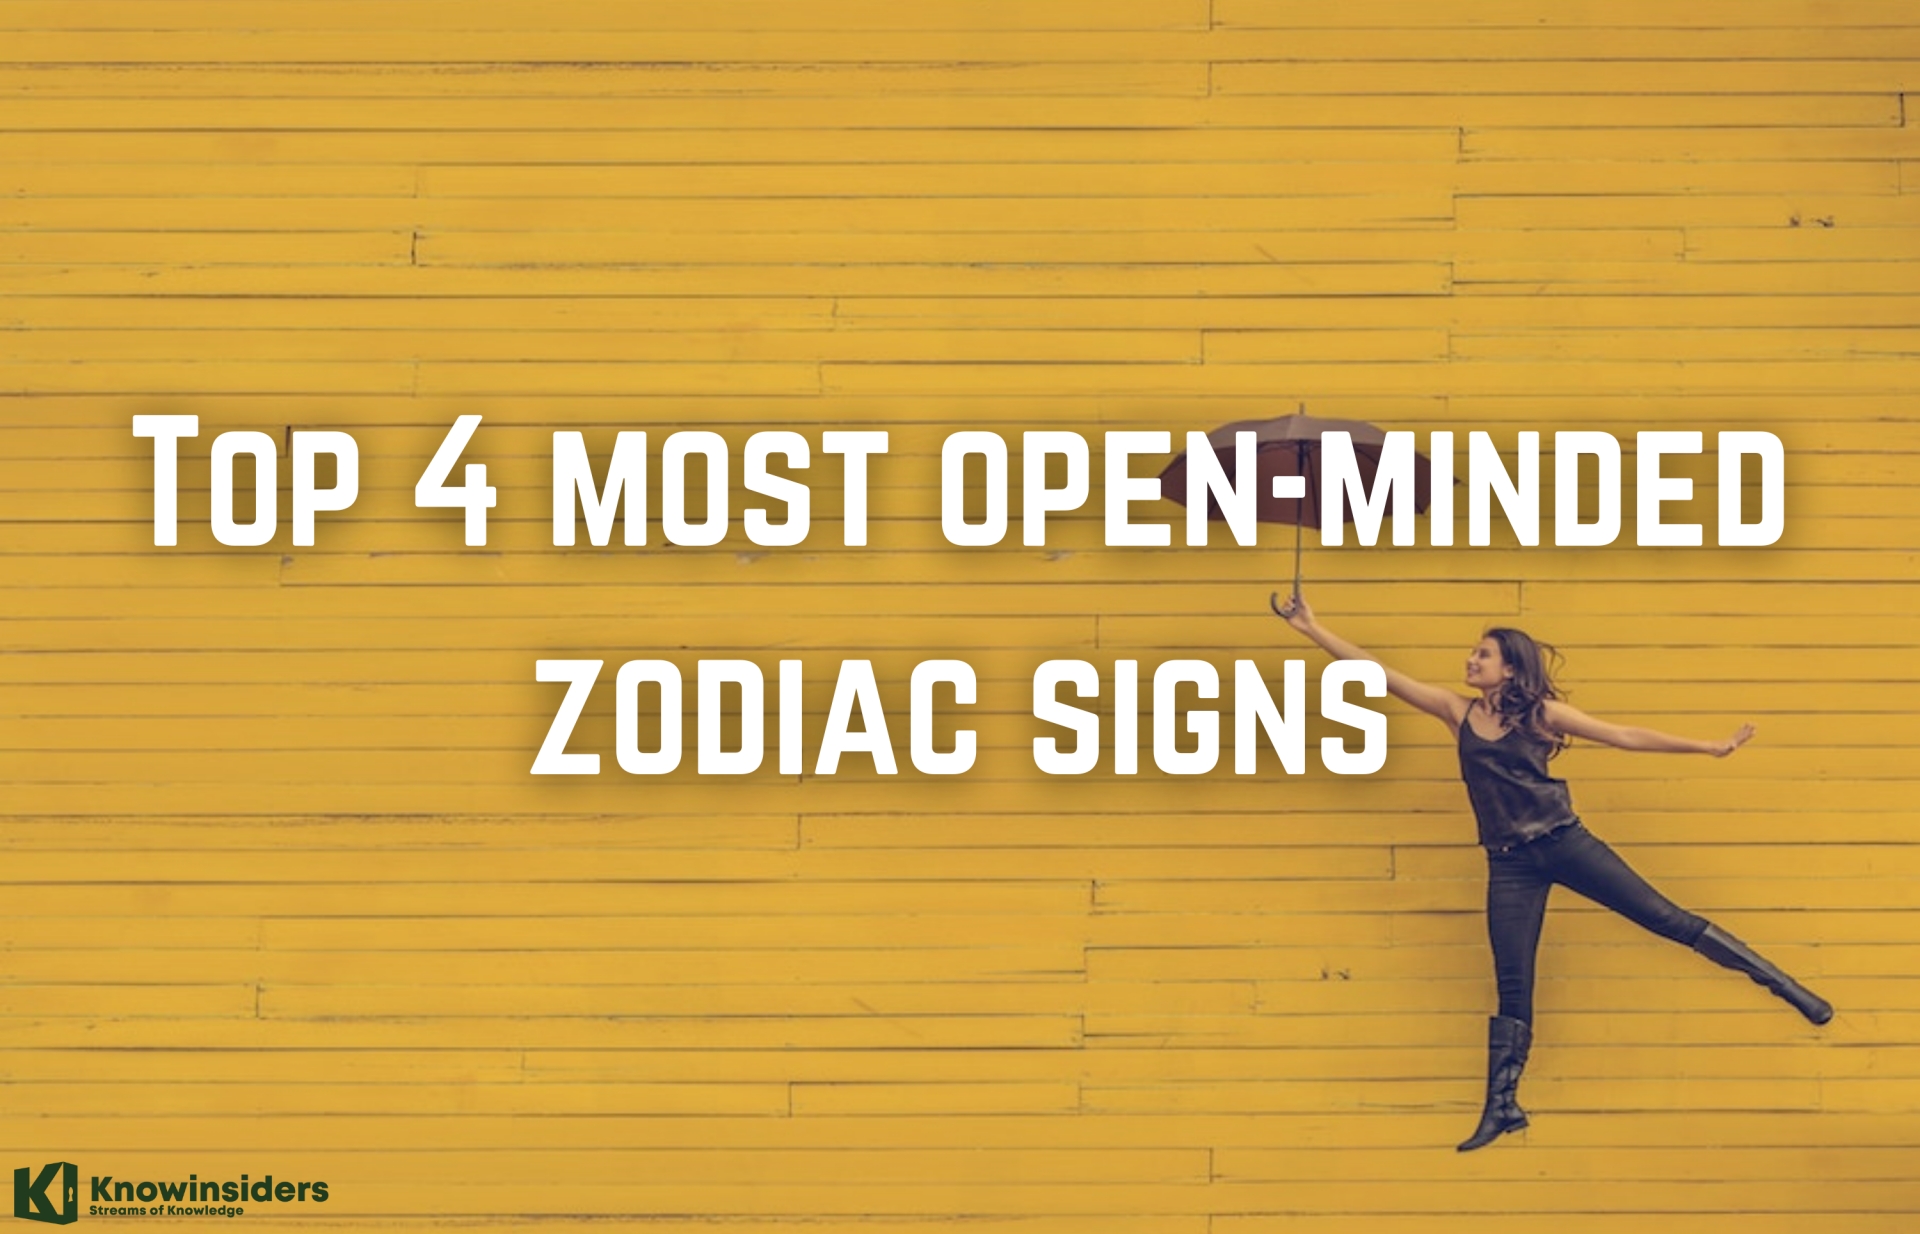 Top 4 Most Open-Minded Zodiac Signs - According to Astrology